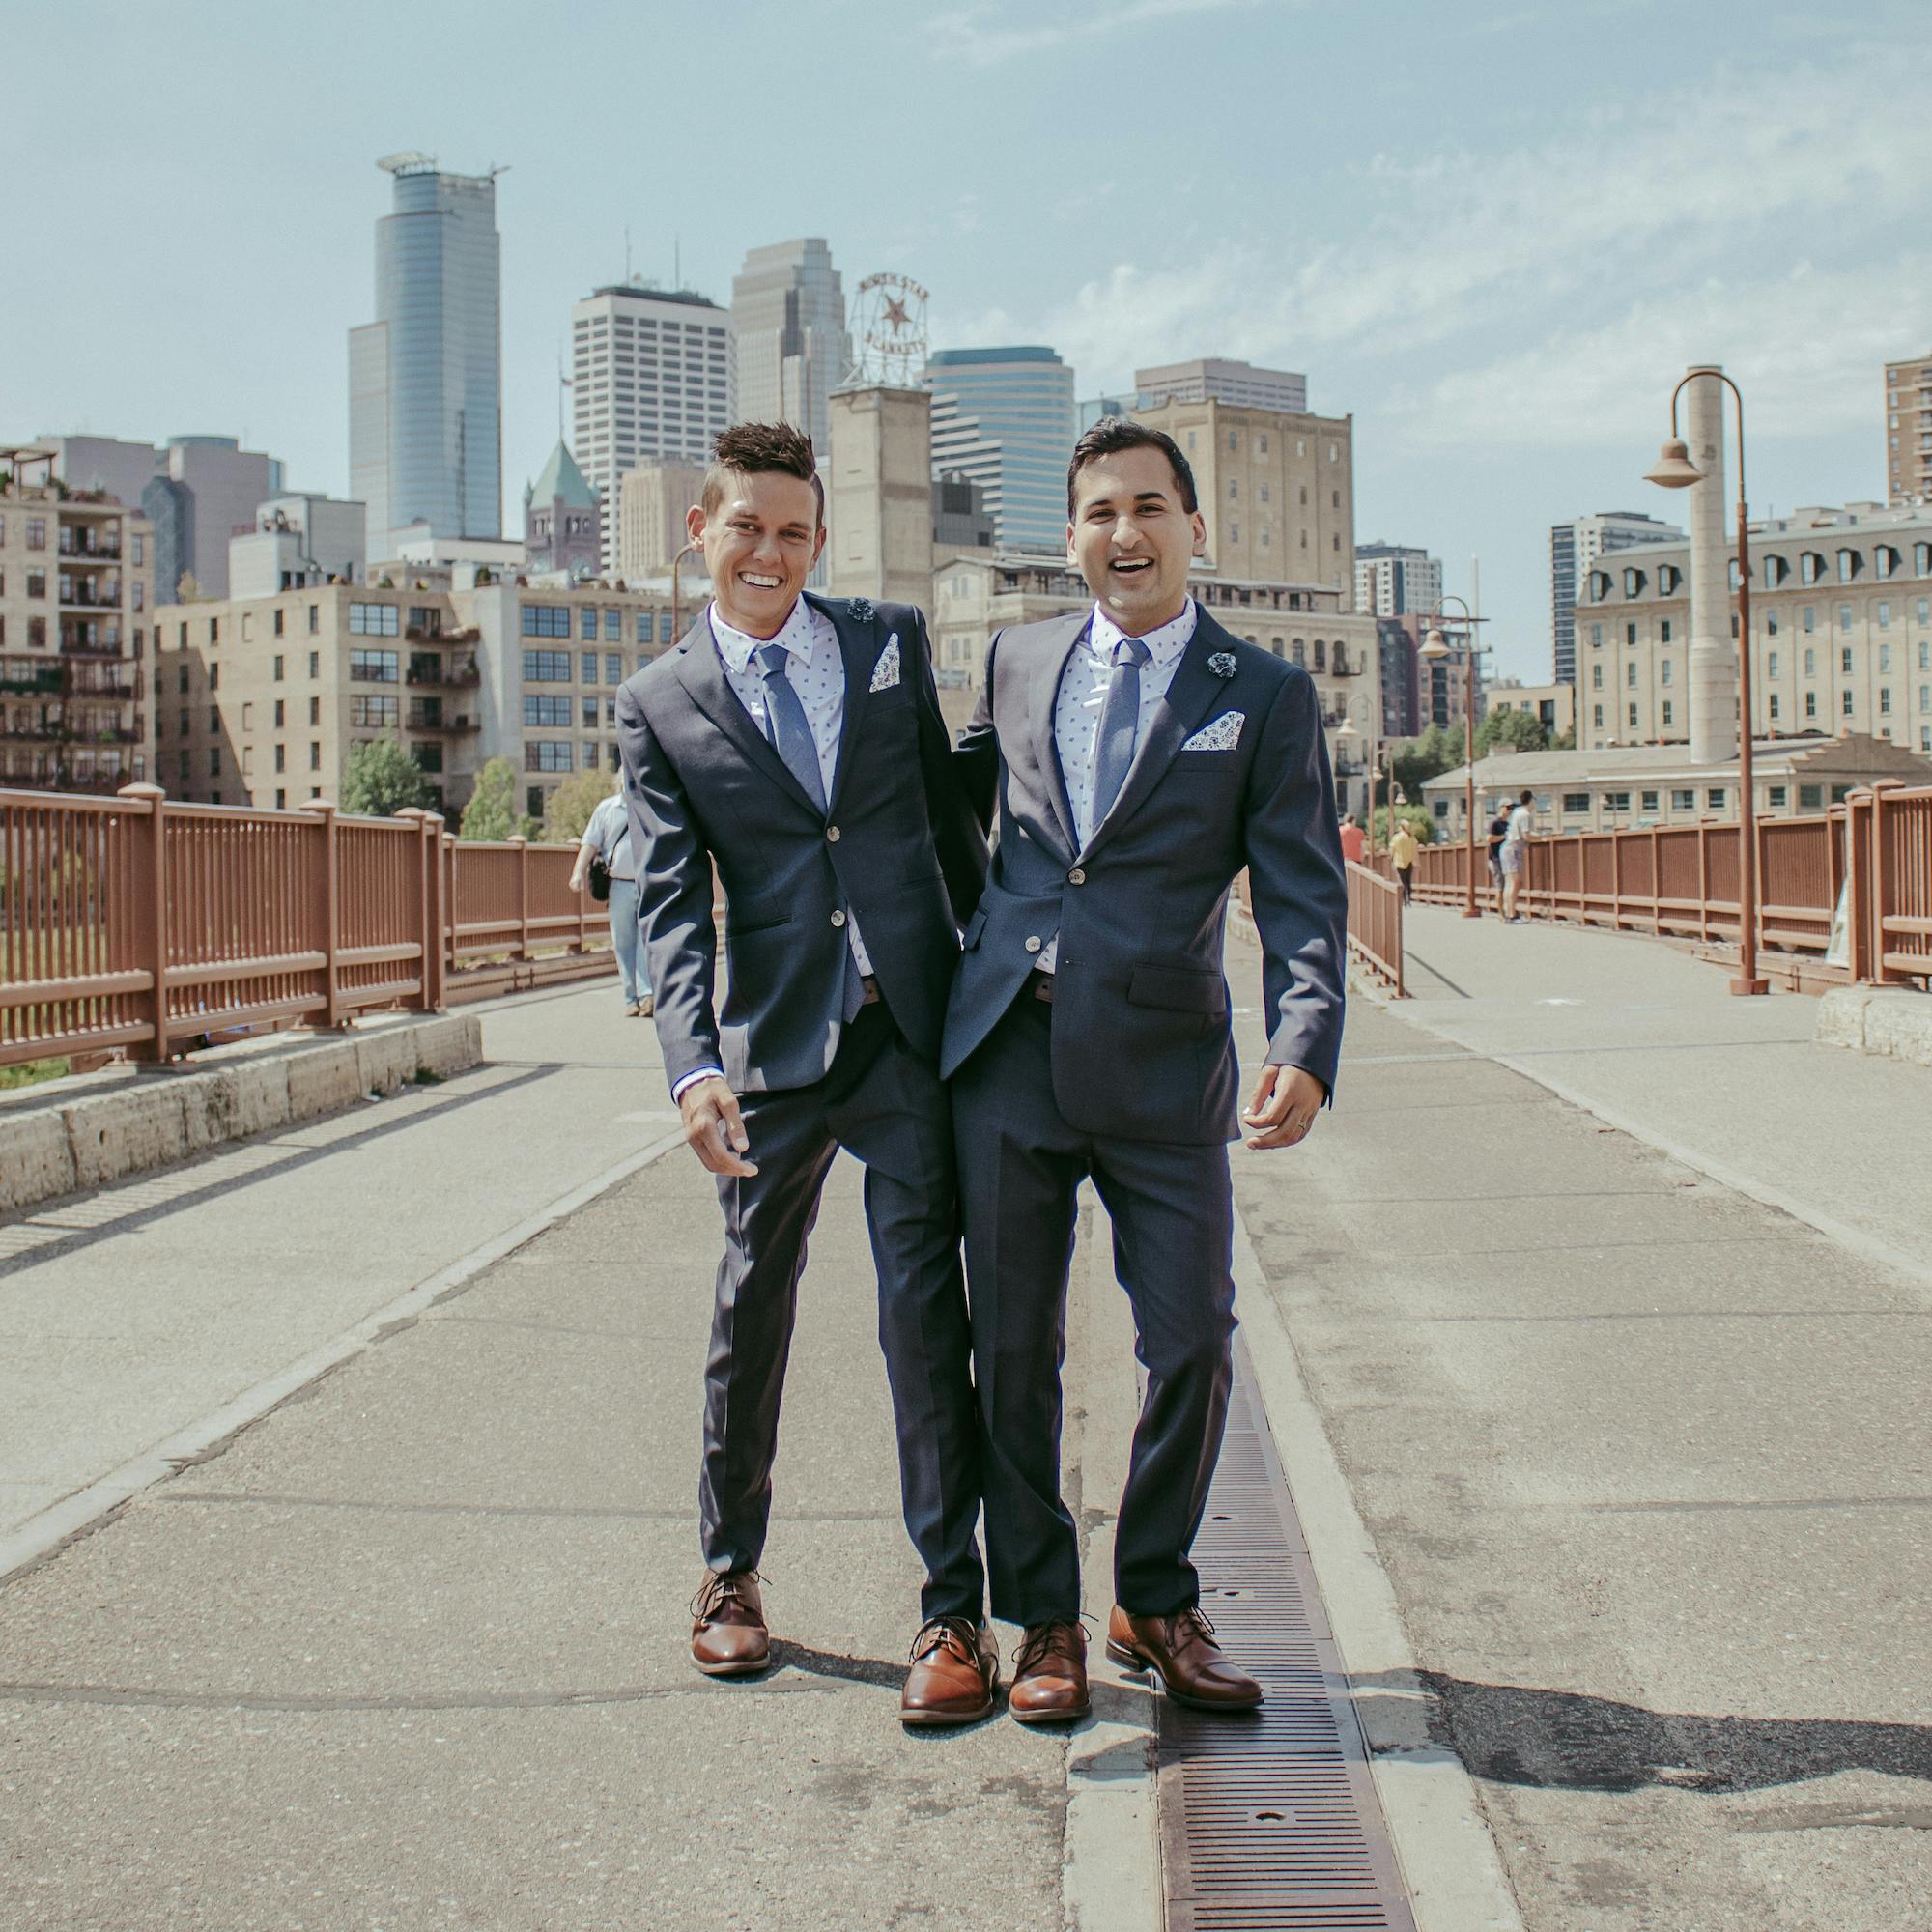 Two smiling men in suits standing on a bridge with a city skyline in the background.